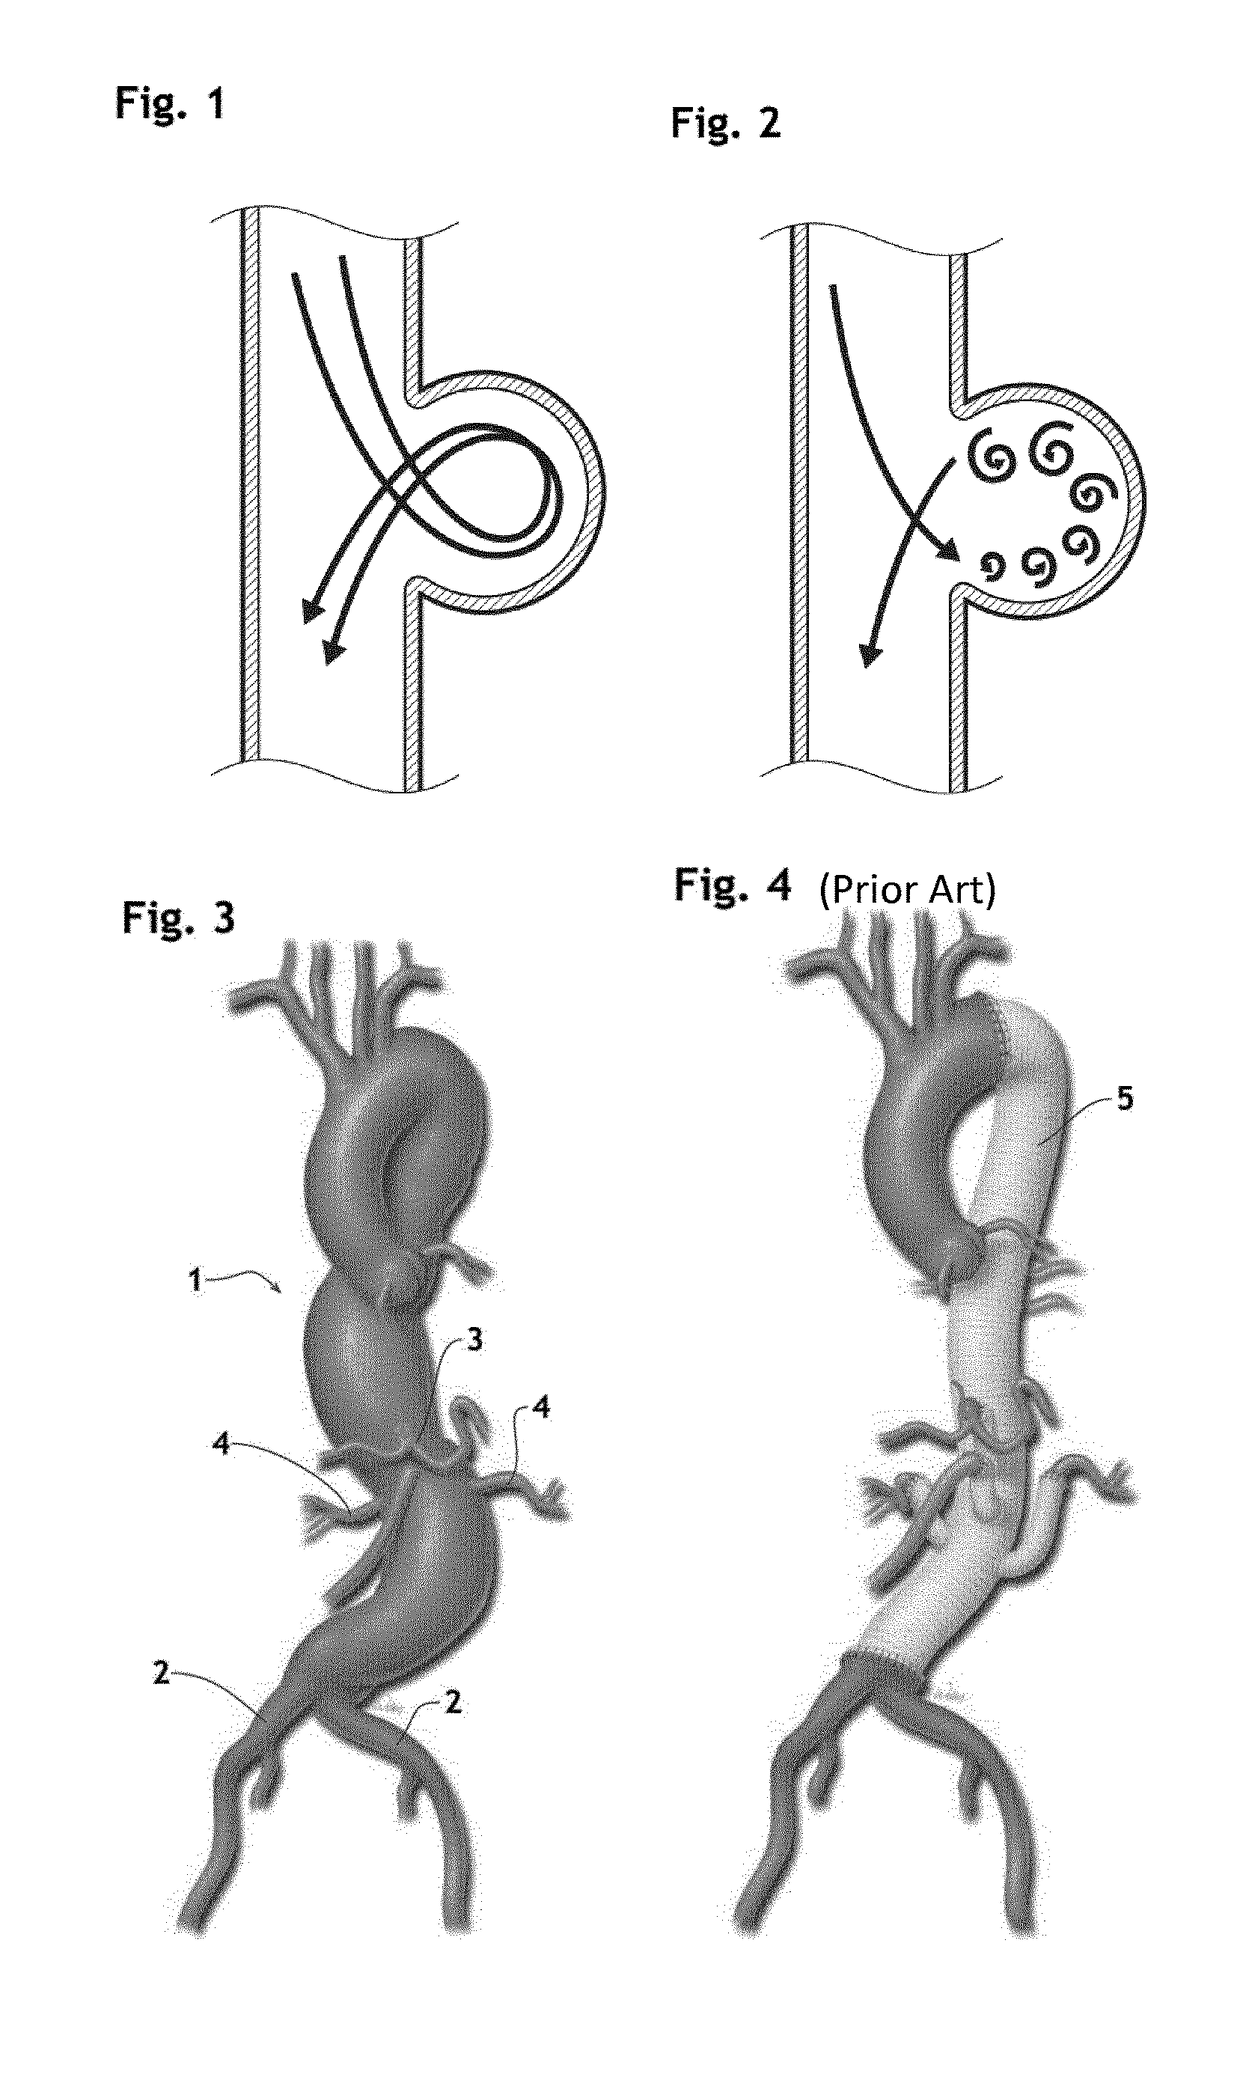 Stent assembly for thoracoabdominal bifurcated aneurysm repair